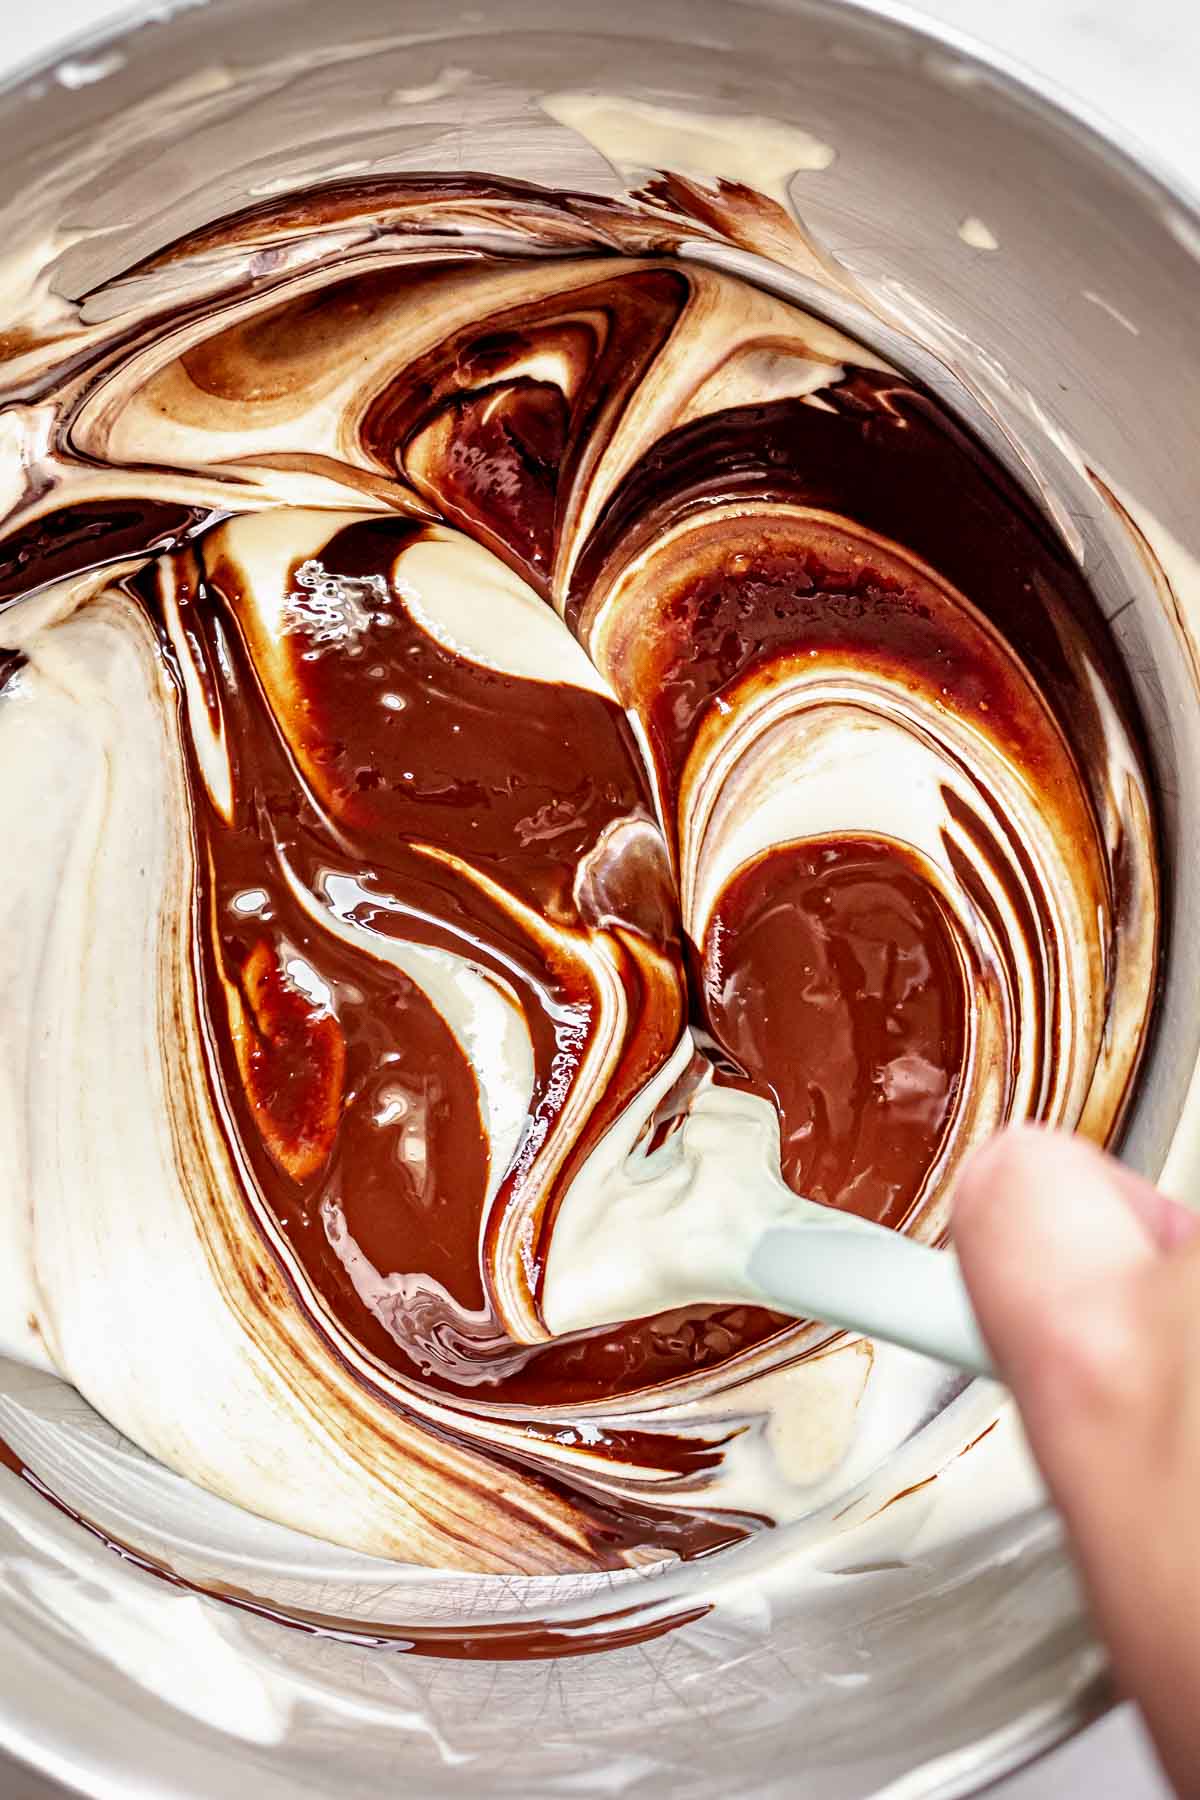 A spatula folds melted chocolate into chocolate cheesecake batter.